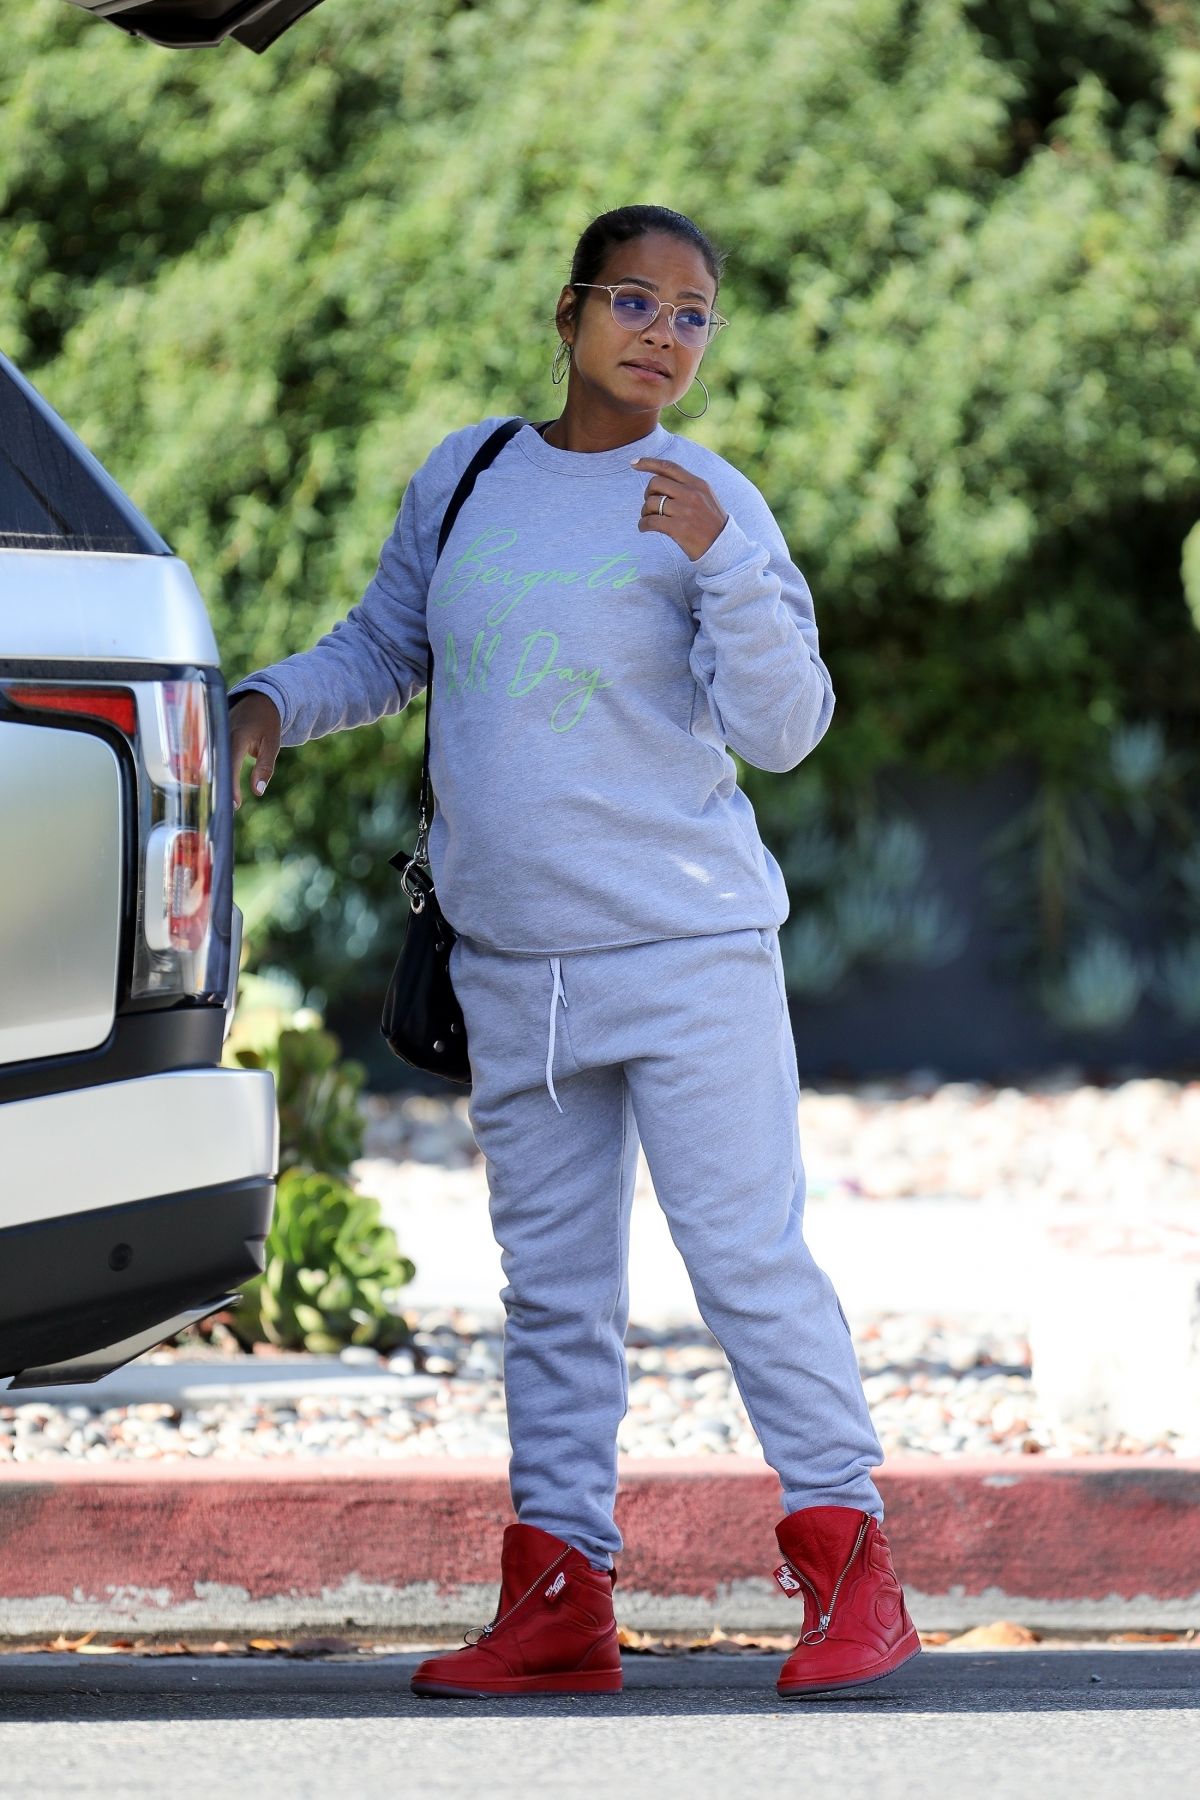 christina-milian-out-and-about-in-studio-city-12-12-2020-4.jpg